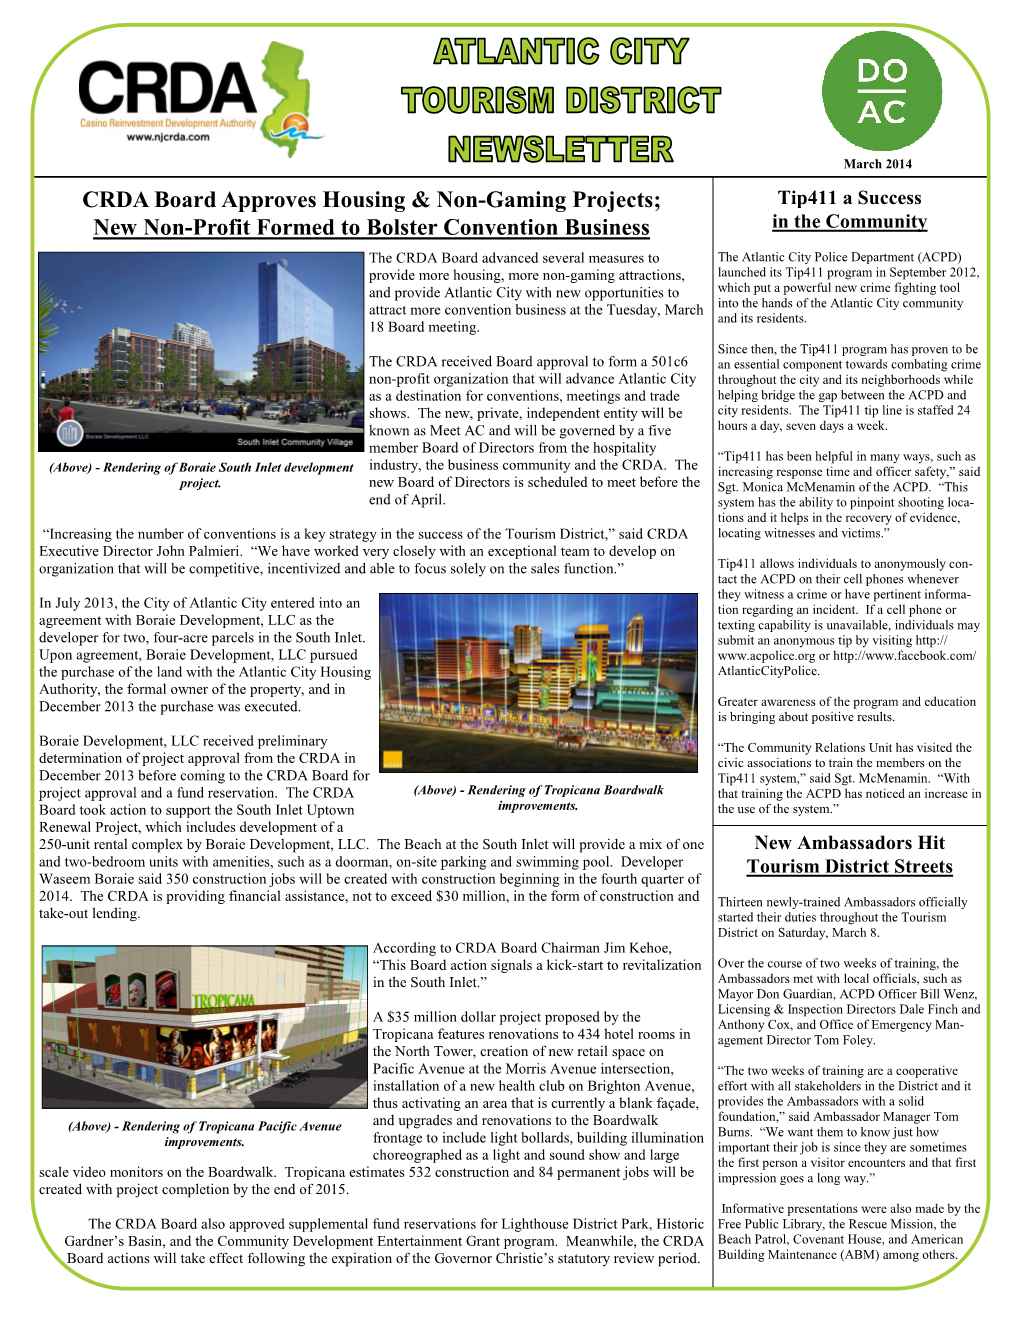 ACTDAC Newsletter March 2014.Pub